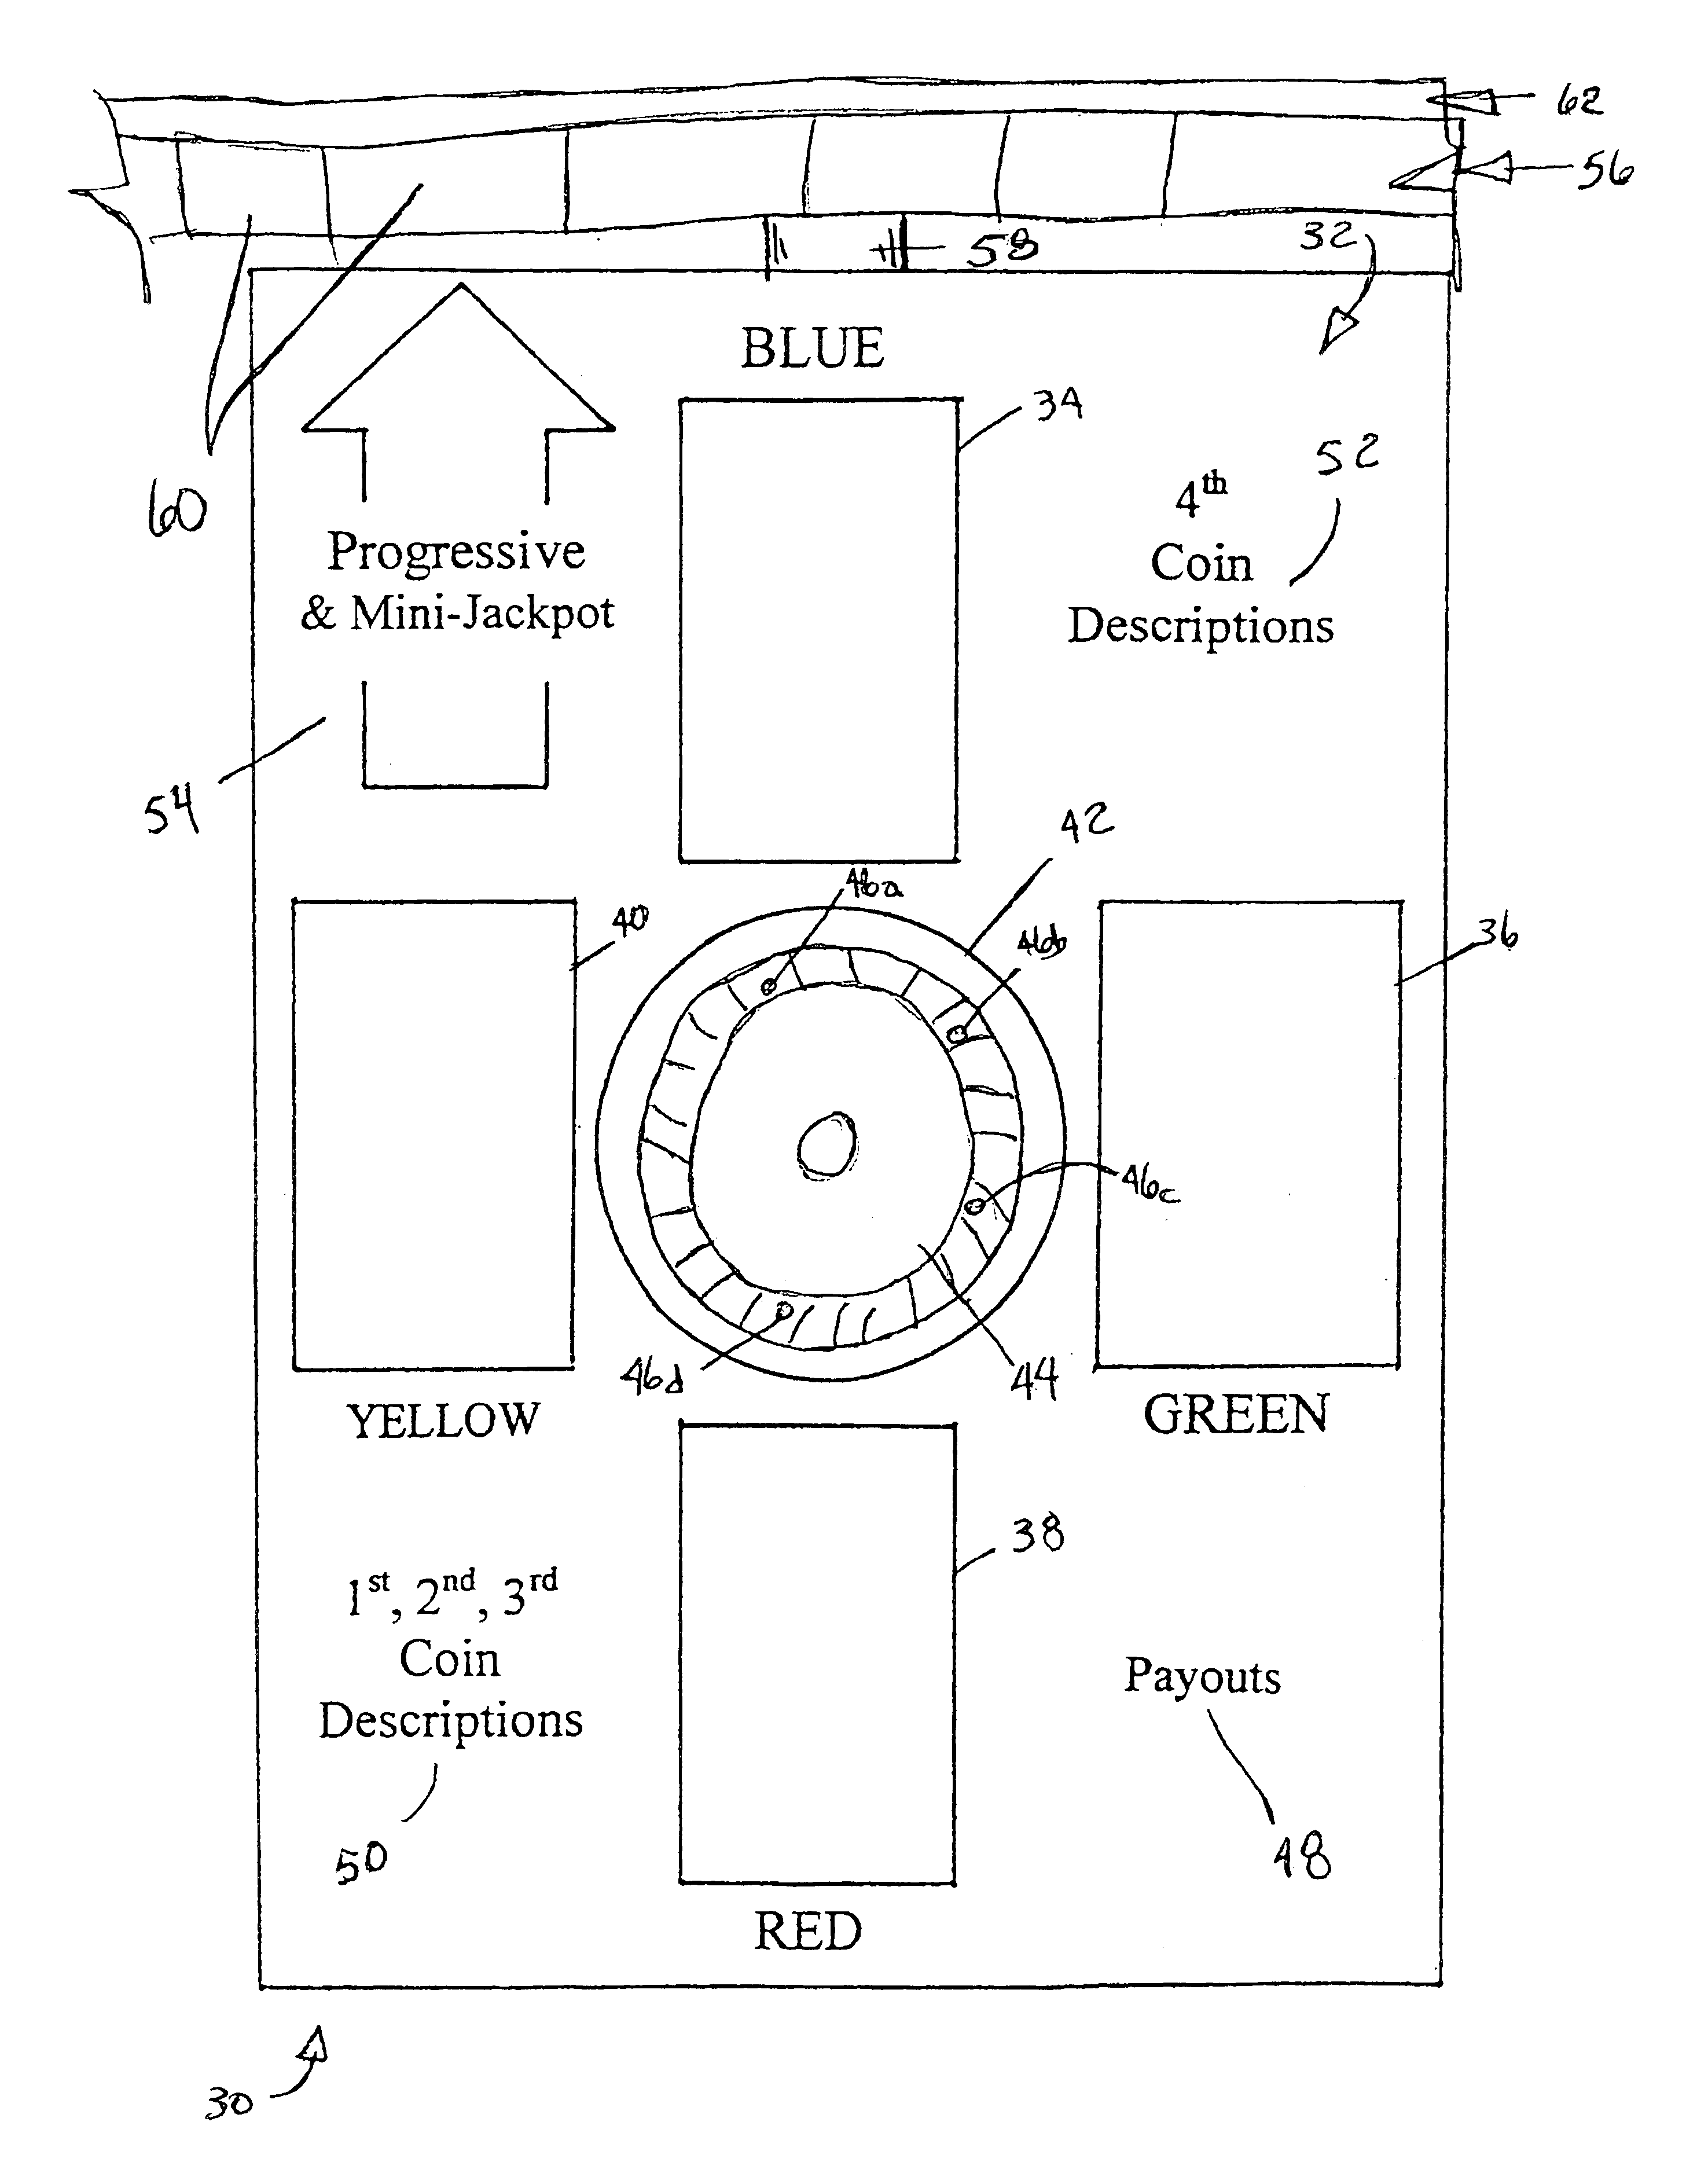 Roulette-type gaming apparatus and method for playing the same